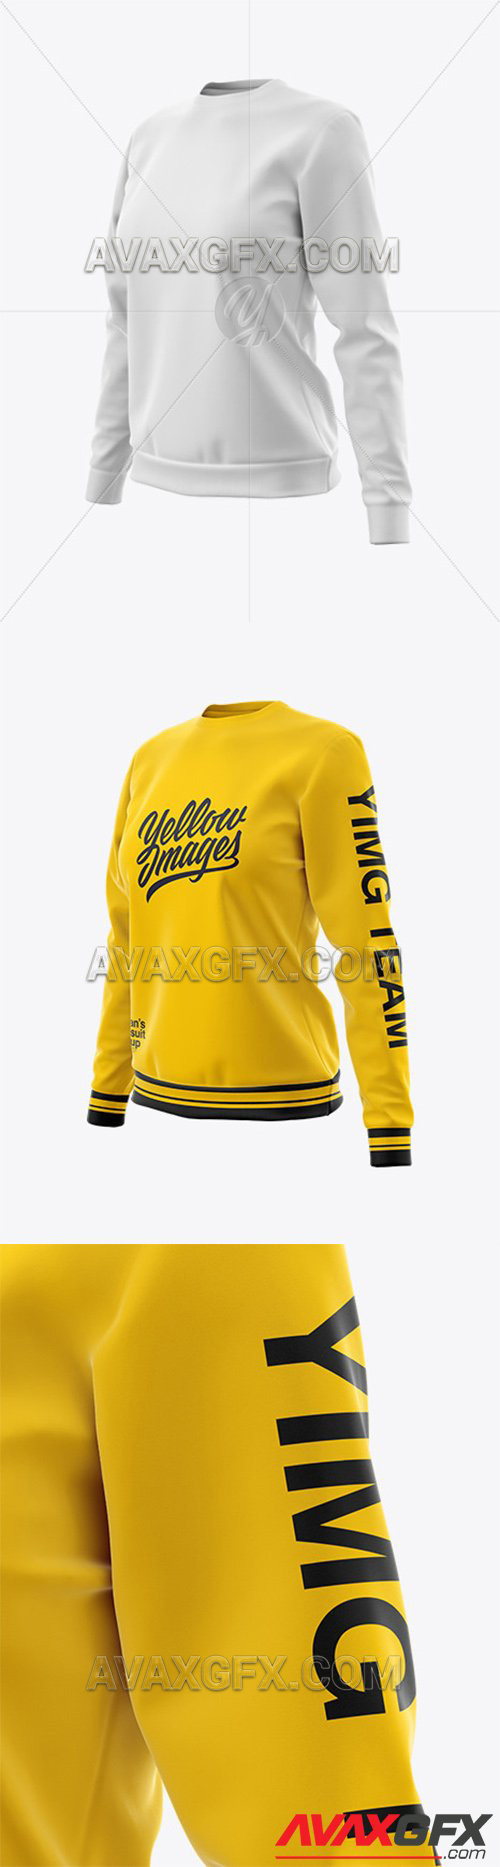 Download Woman S Tracksuit Mockup Half Side View 57291 Avaxgfx All Downloads That You Need In One Place Graphic From Nitroflare Rapidgator